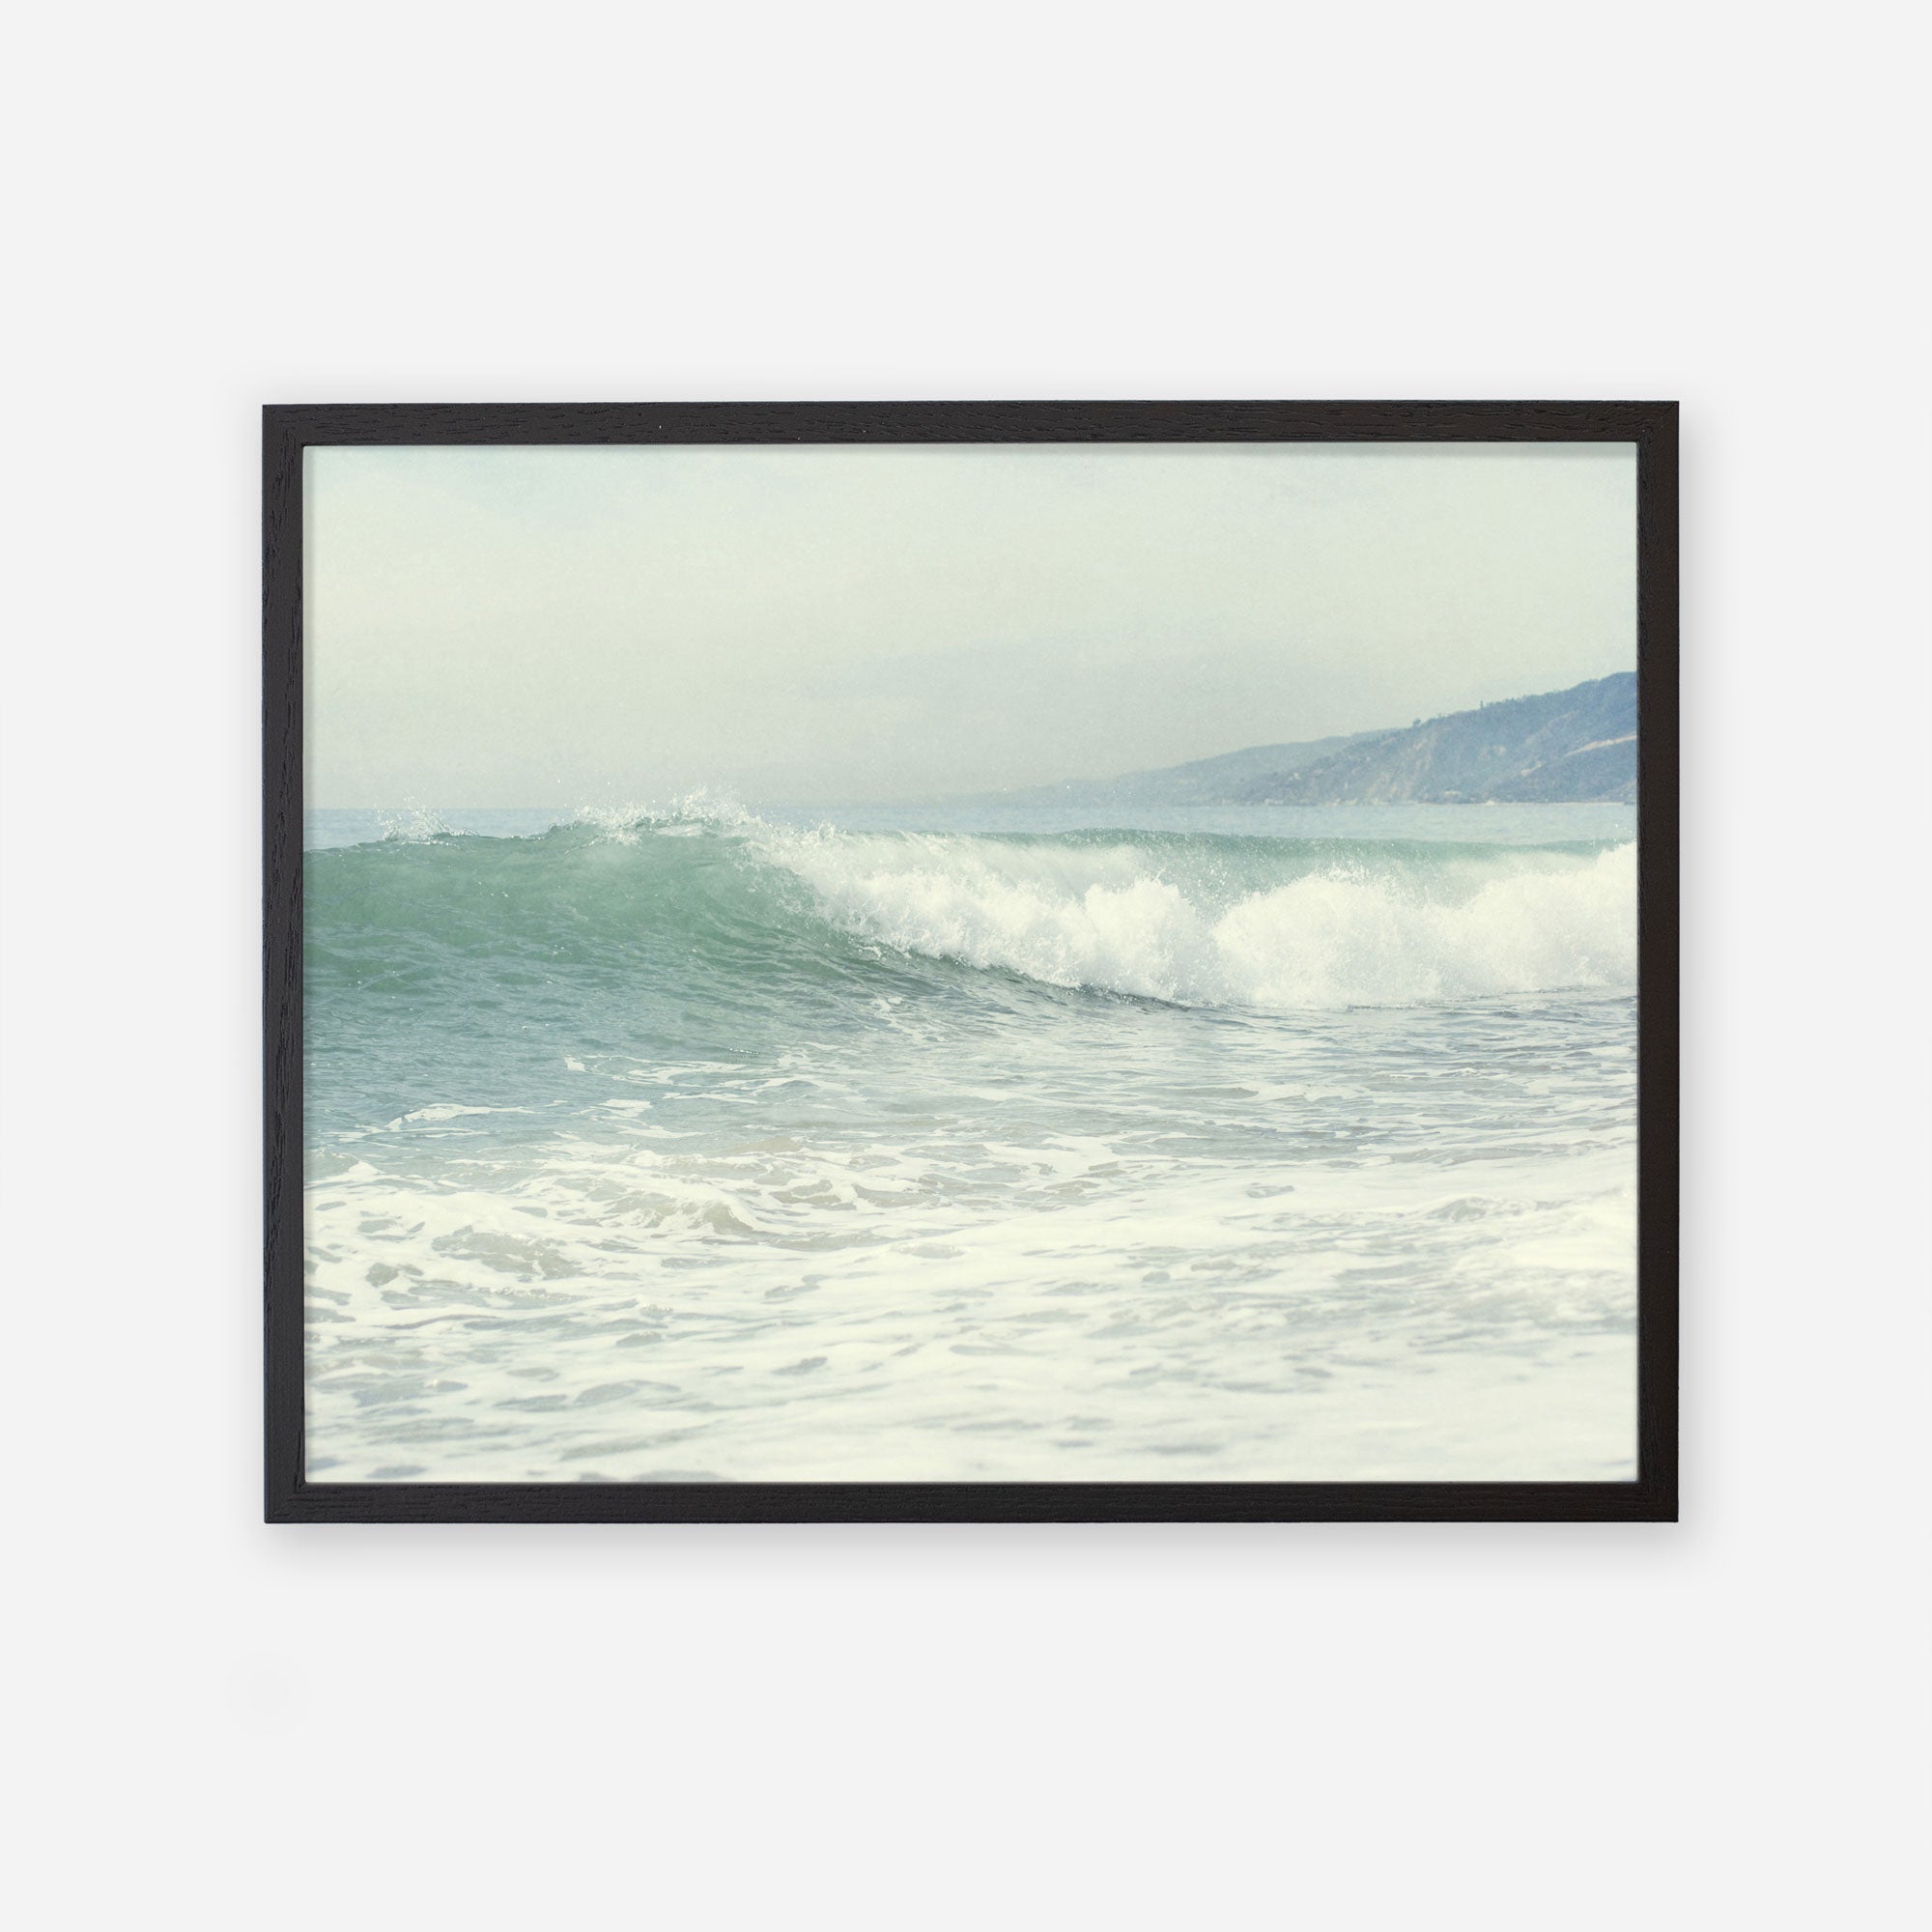 A framed Offley Green Coastal Print of a Breaking Wave &#39;Breaking Surf&#39;, depicting a gentle wave cresting in the ocean with hazy hills visible in the background. The image, printed on archival photographic paper, evokes a serene Southern California beach scene.